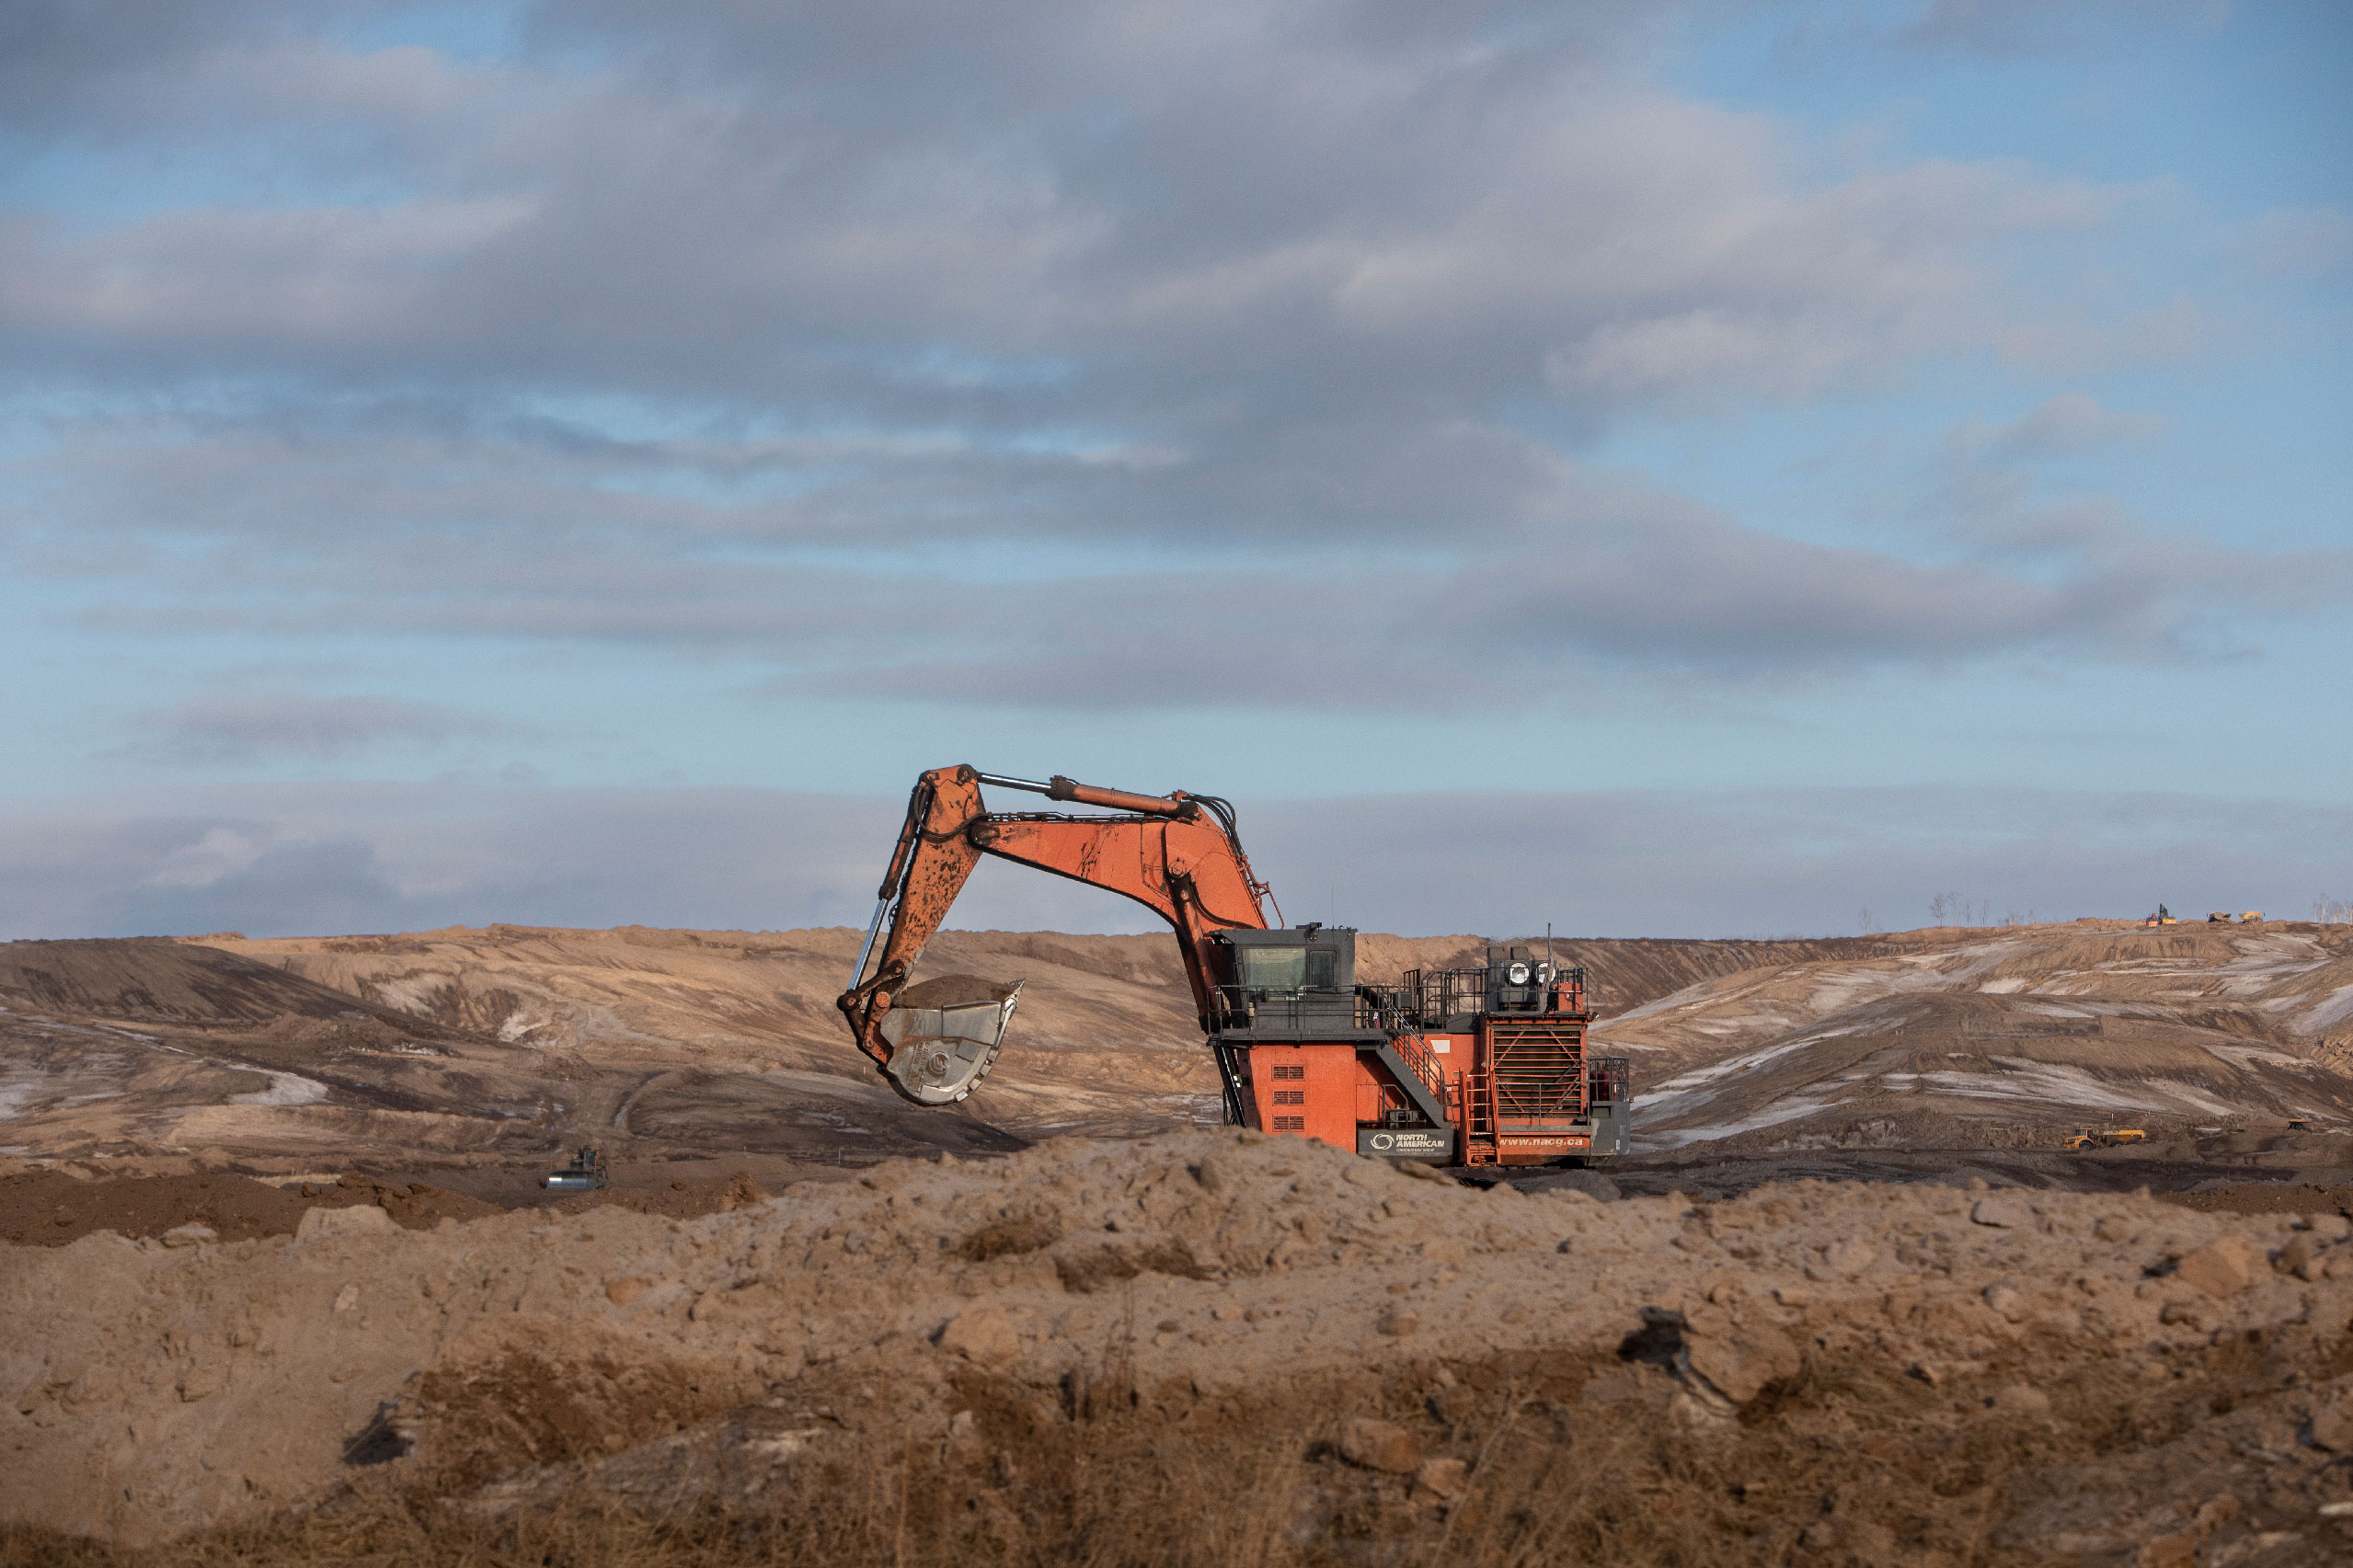 An orange excavator digs into brown surroundings at the Alberta oilsands.